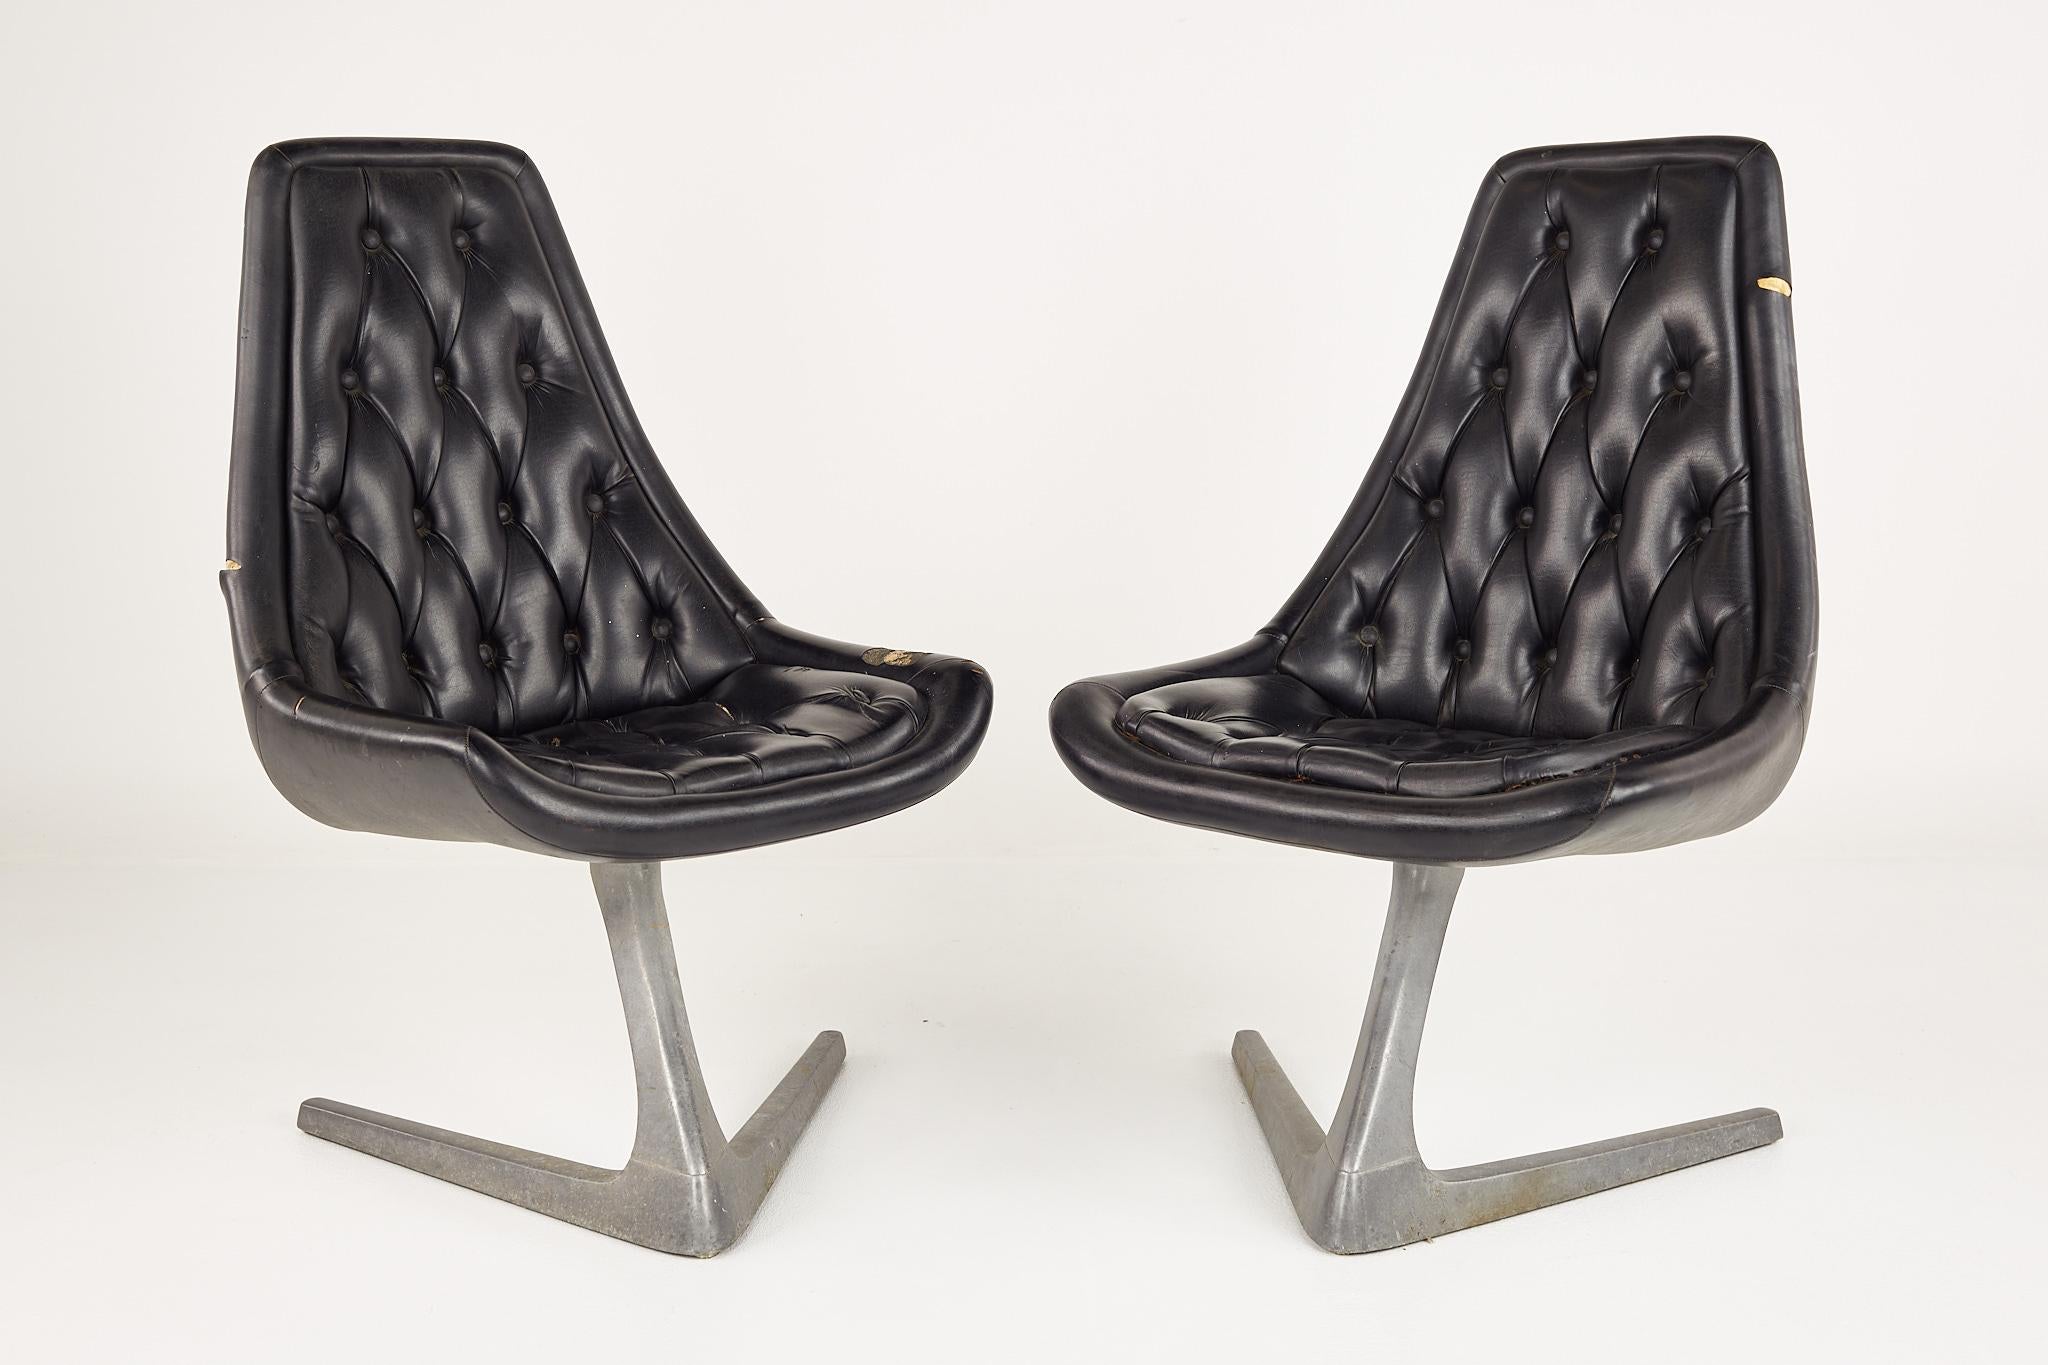 Chromcraft sculpta mid-century star trek chairs - pair.

These chairs measure: 22 wide x 25 deep x 37.5 inches high, with a seat height of 17 inches.

?All pieces of furniture can be had in what we call restored vintage condition. That means the